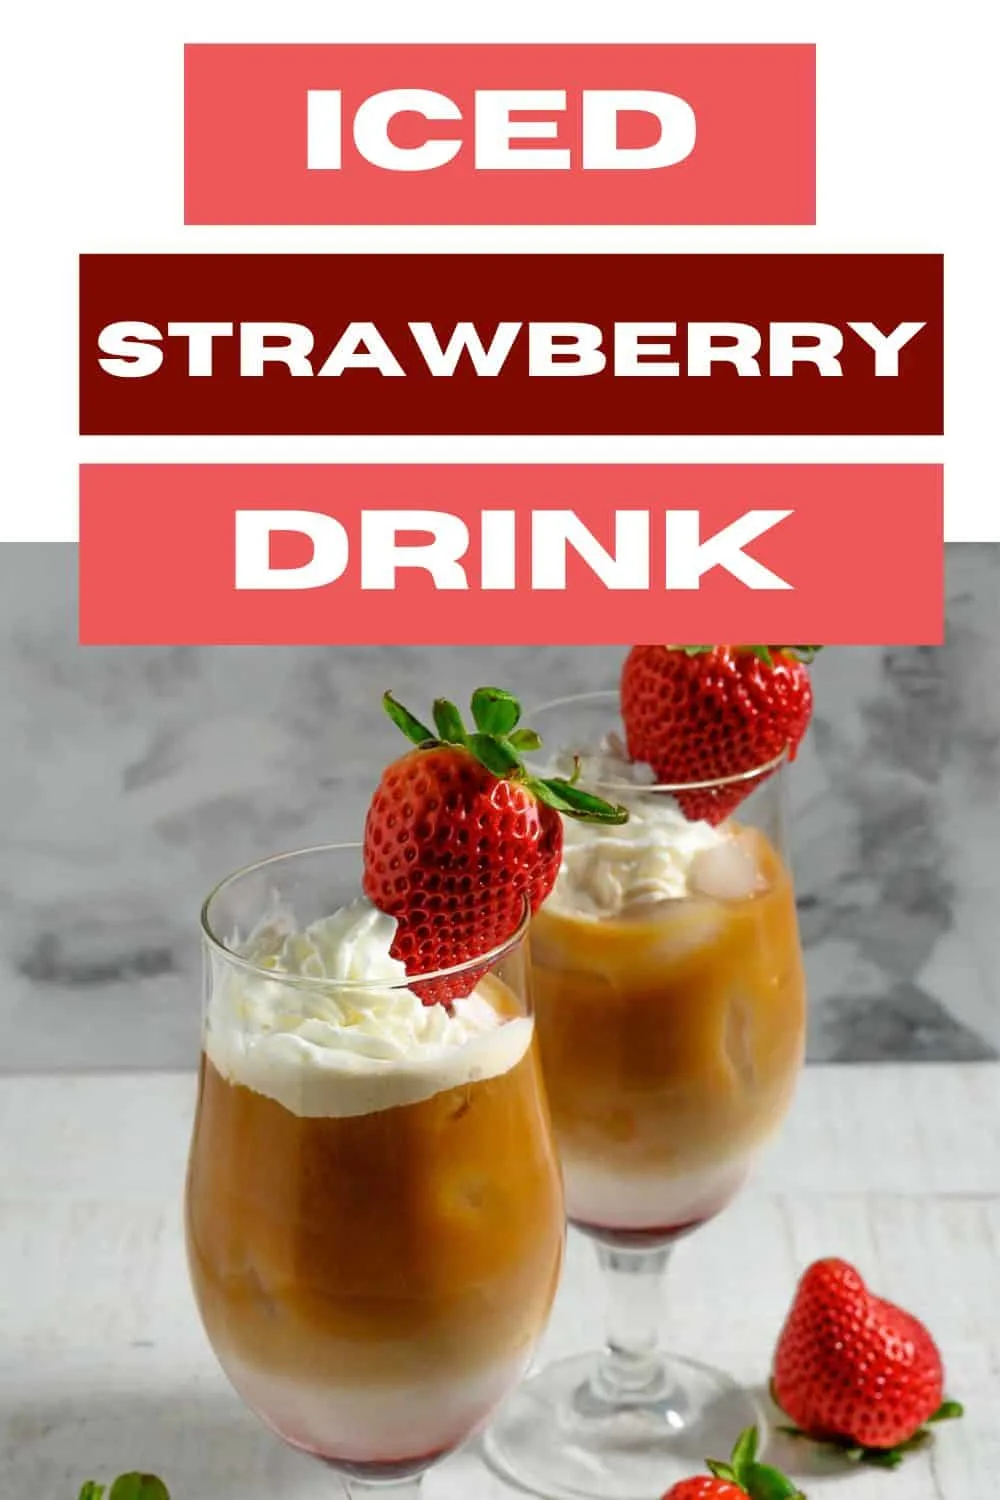 Iced Strawberry Drink topped with whipped cream and a fresh strawberry.